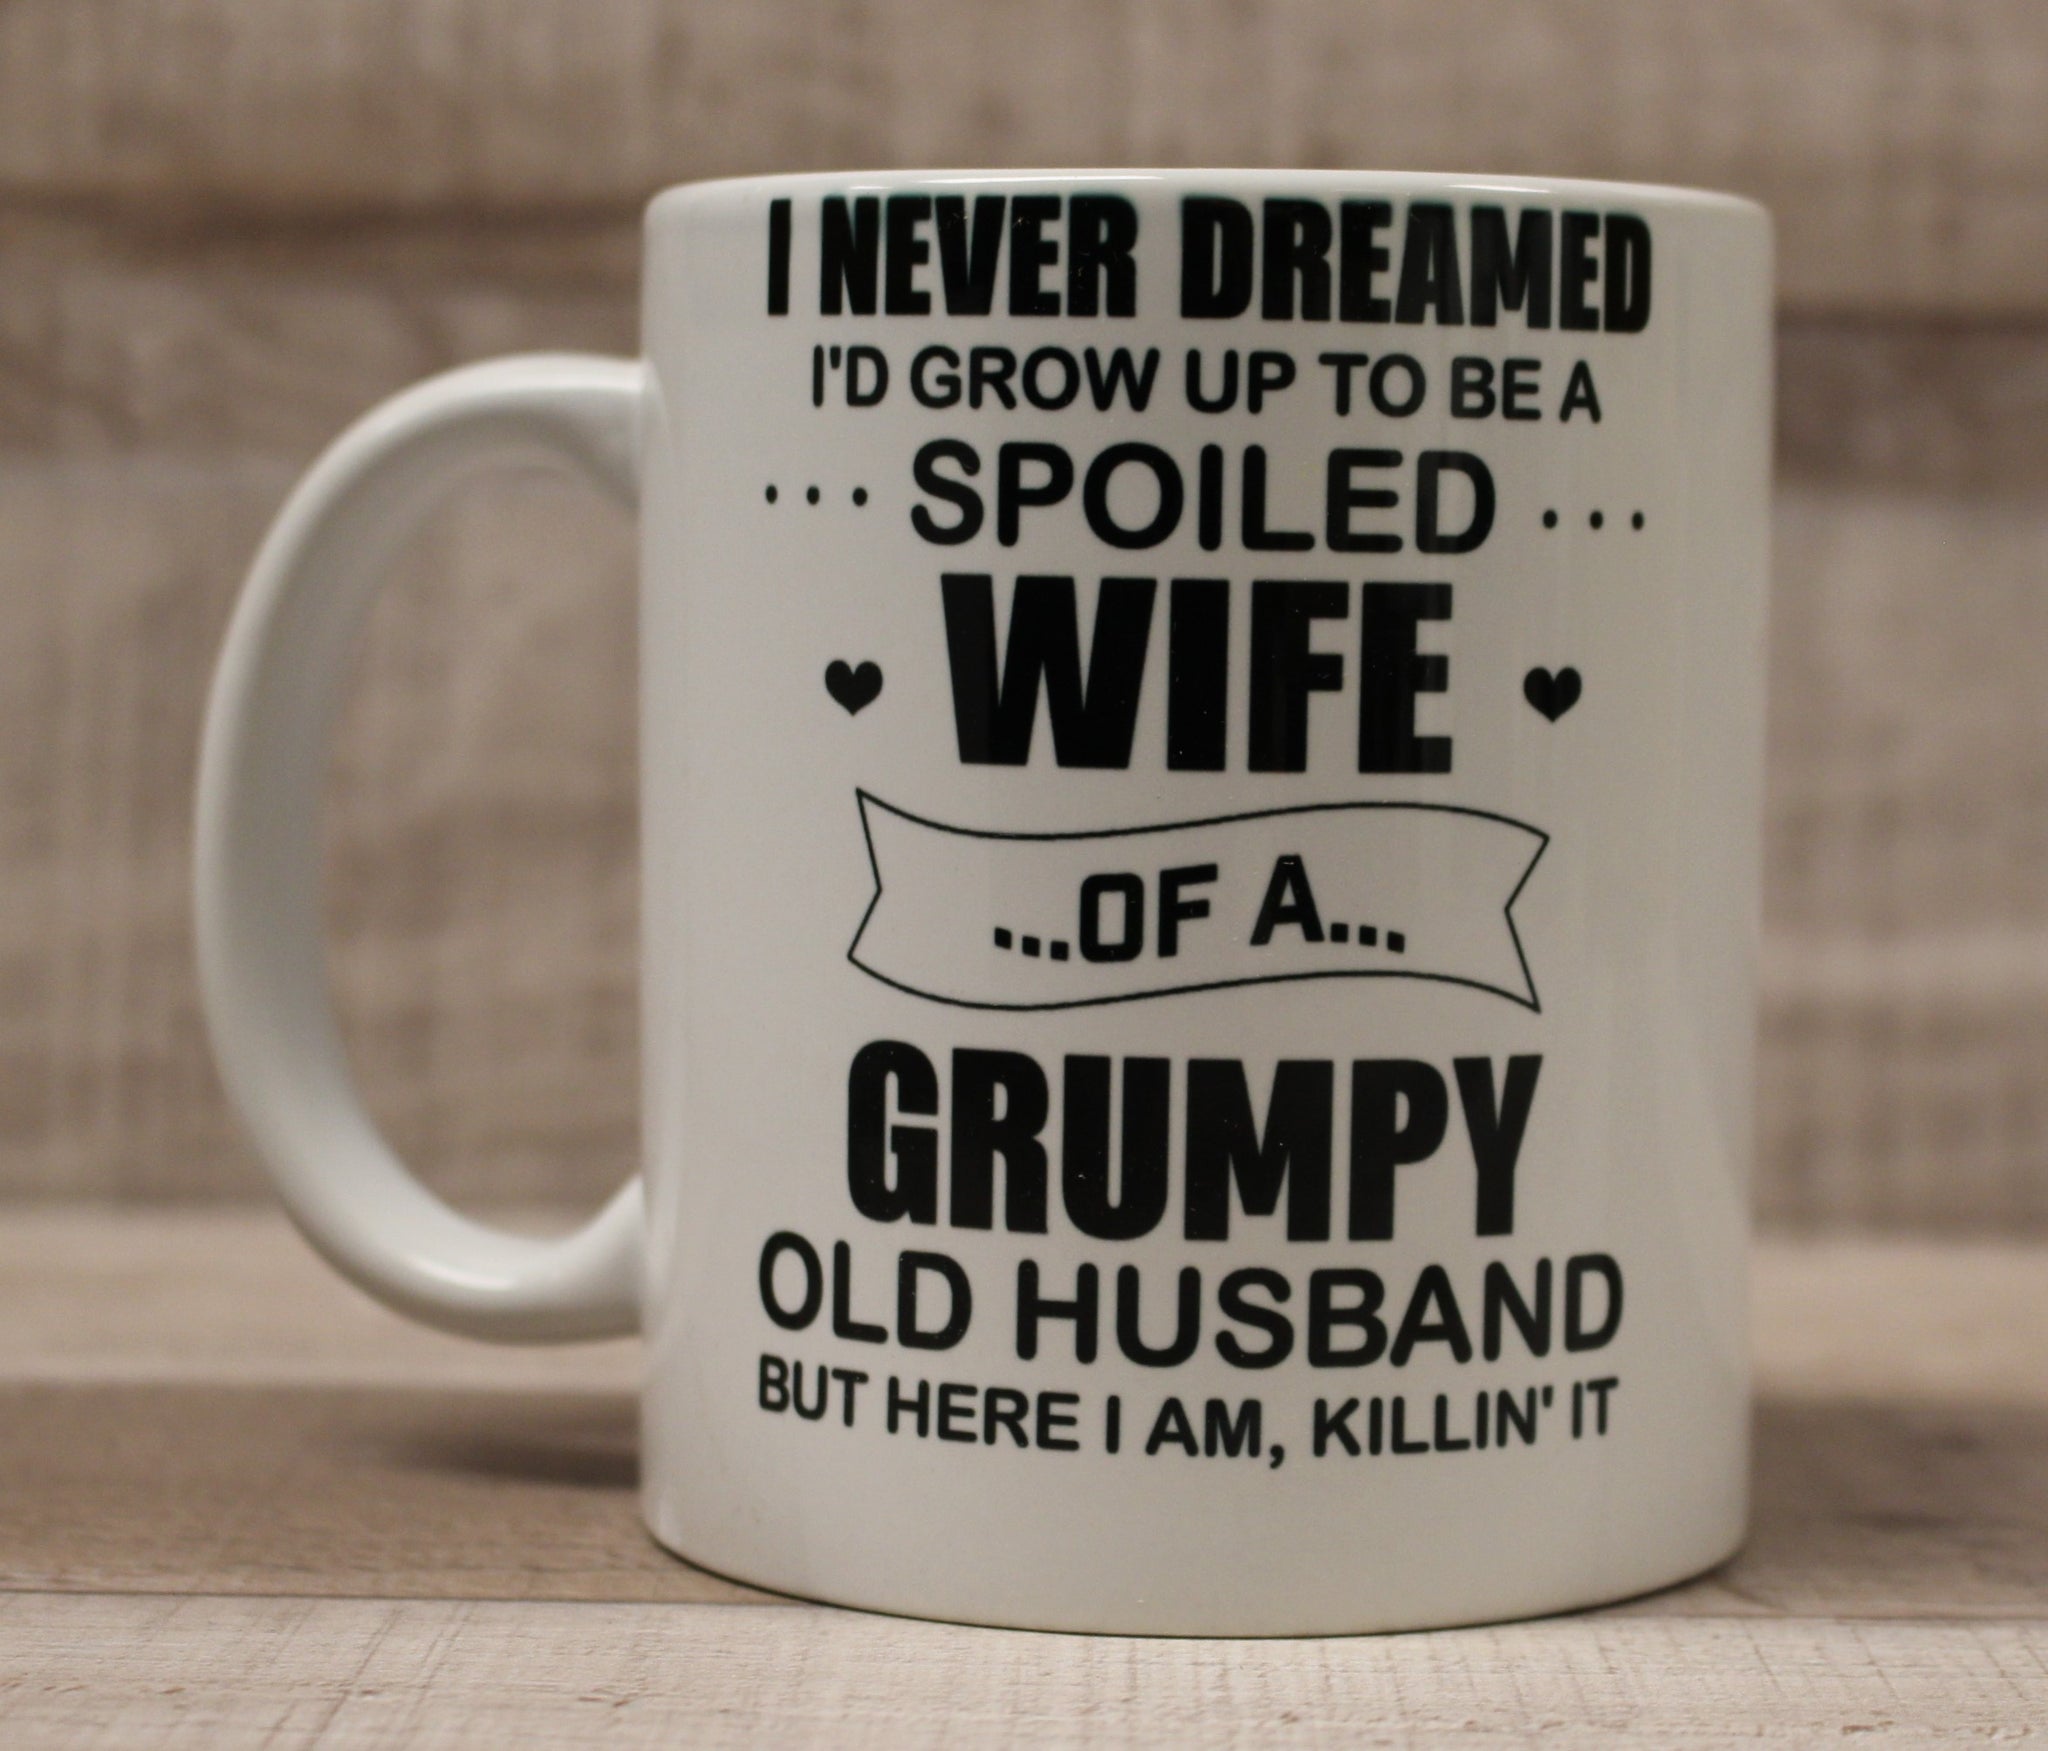 I never dreamed grow up to be a spoiled wife of a grumpy old man